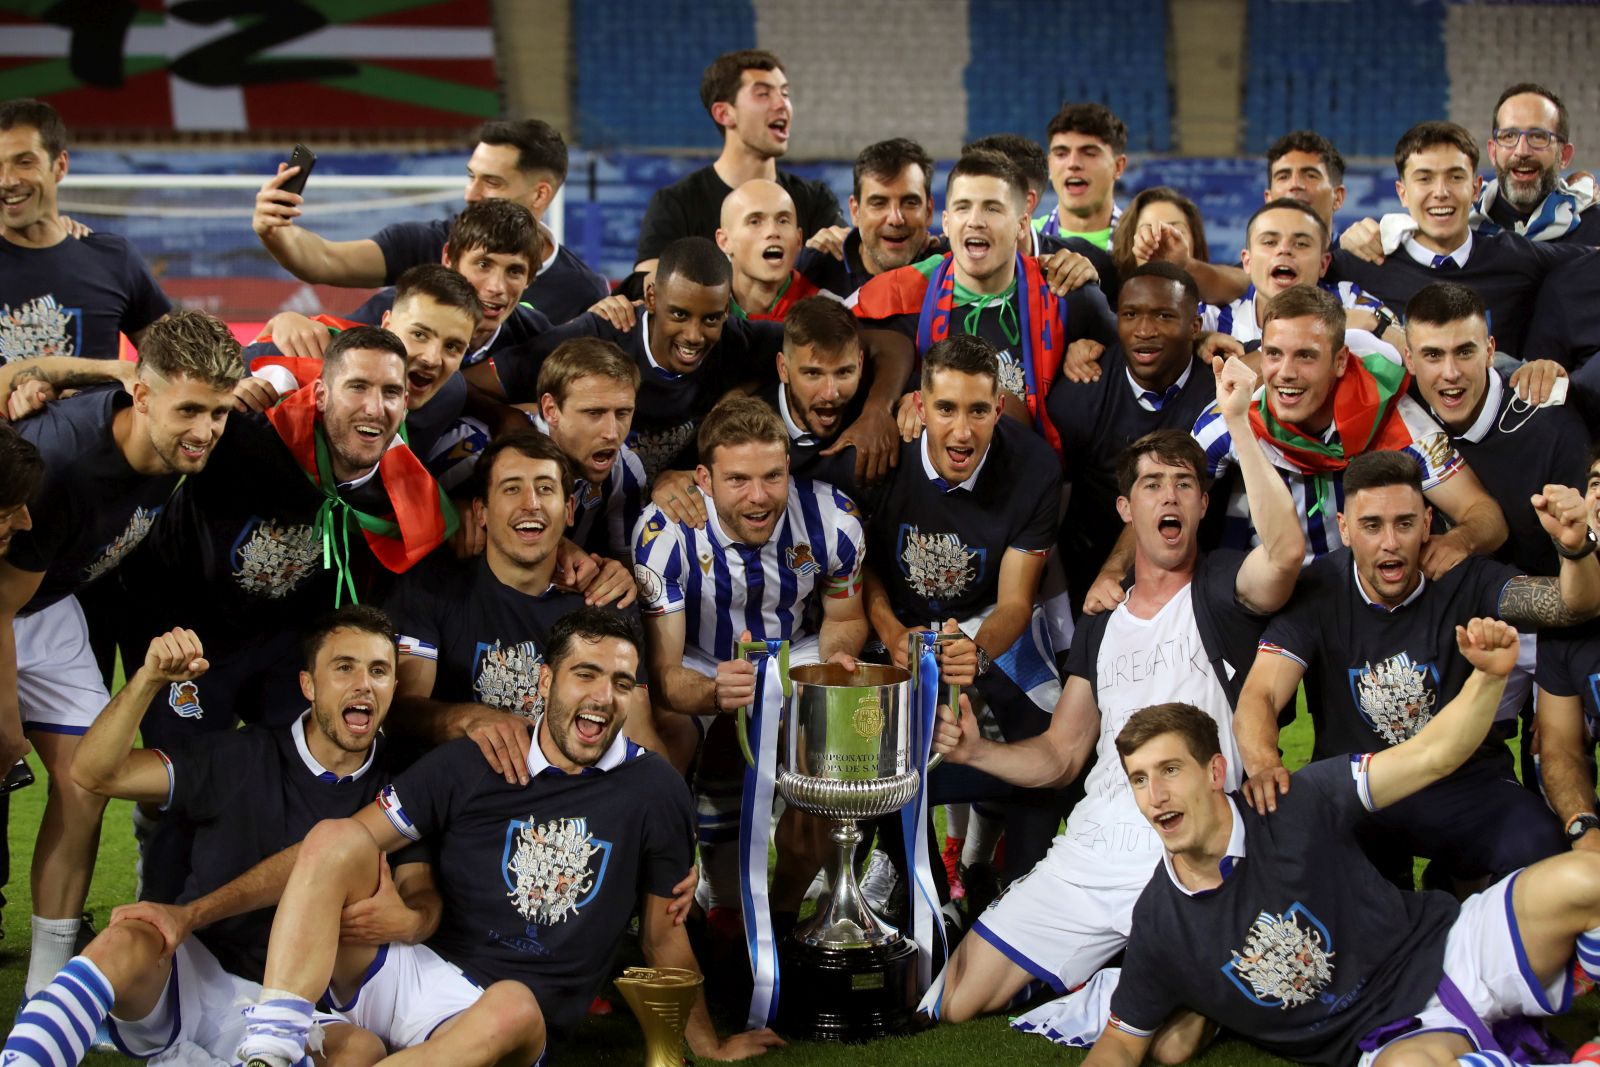 epa09114768 A handout photo made available by the Spanish Royal Soccer Federation (RFEF) shows Real Sociedad players posing with the trophy from Spain's King Felipe VI (C-L) after winning the 2020 Spanish King's Cup final soccer match against Athletic Club at La Cartuja stadium in Seville, Andalusia, Spain, 03 April 2021.  EPA/RFEF HANDOUT IMAGE TO BE USED ONLY IN RELATION TO THE STATED EVENT / MANDATORY CREDIT HANDOUT EDITORIAL USE ONLY/NO SALES HANDOUT EDITORIAL USE ONLY/NO SALES